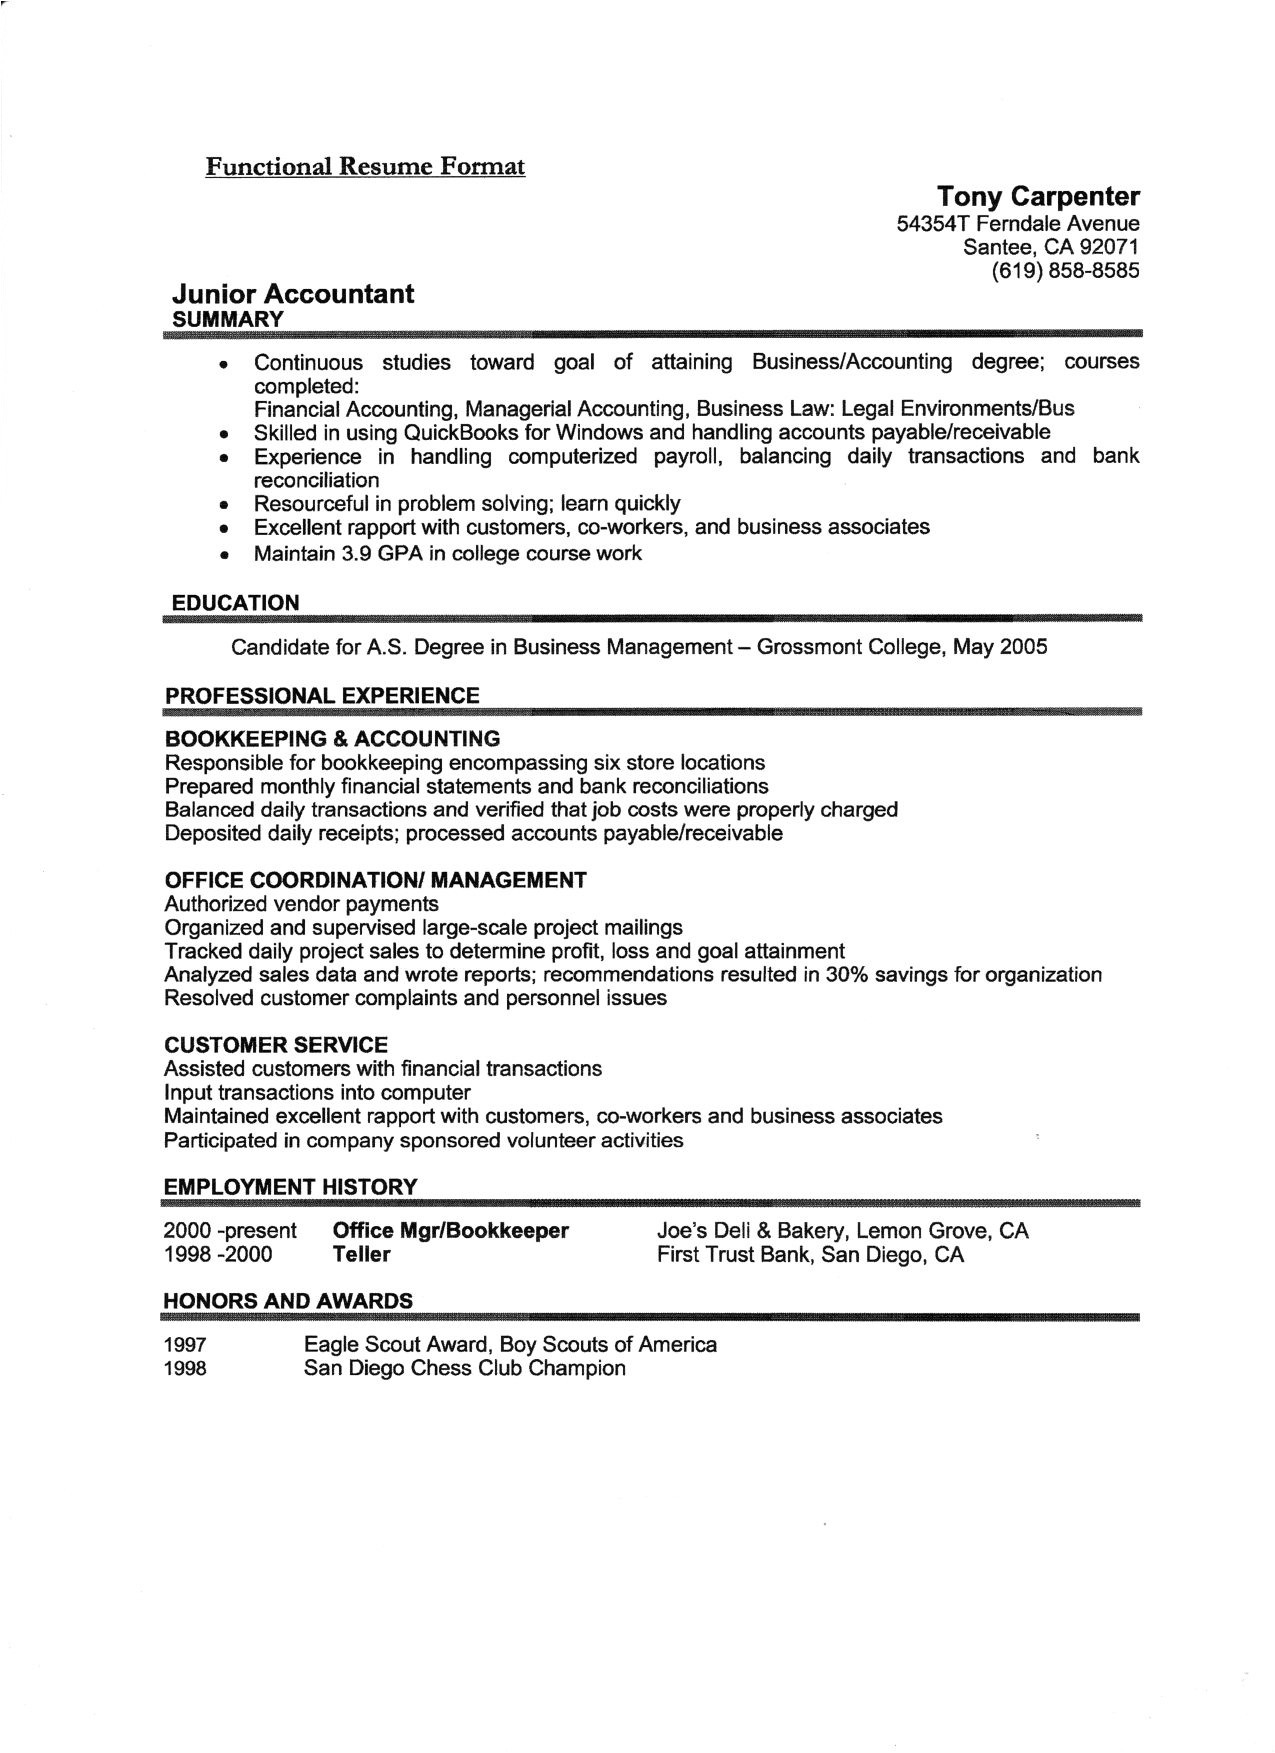 accountant resume format free for download bank reconciliation